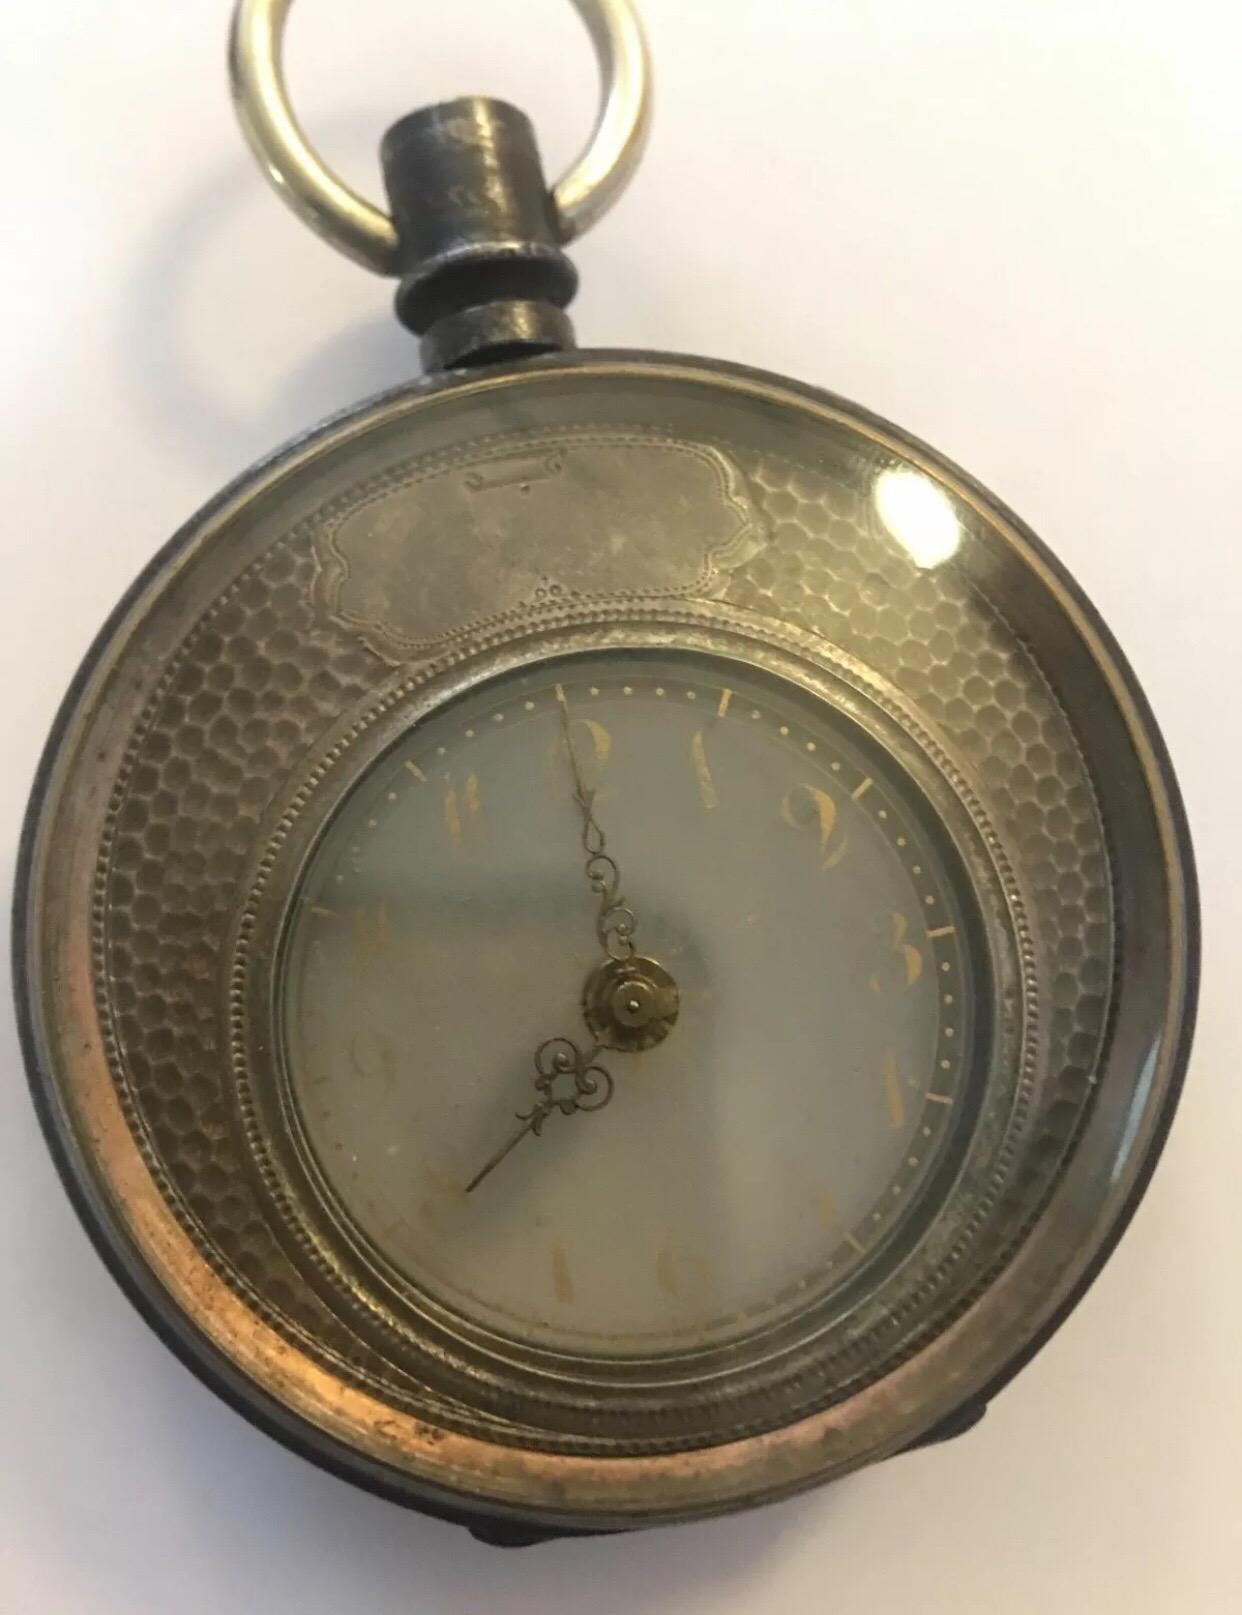 Here we a have a very fine and rare vintage Swiss solid silver late 19th century mystery pocket watch. The watch has a transparent glass dial with applied gilt Arabic numerals.  Keyless wind crescent shaped movement hidden under the silver guilloche